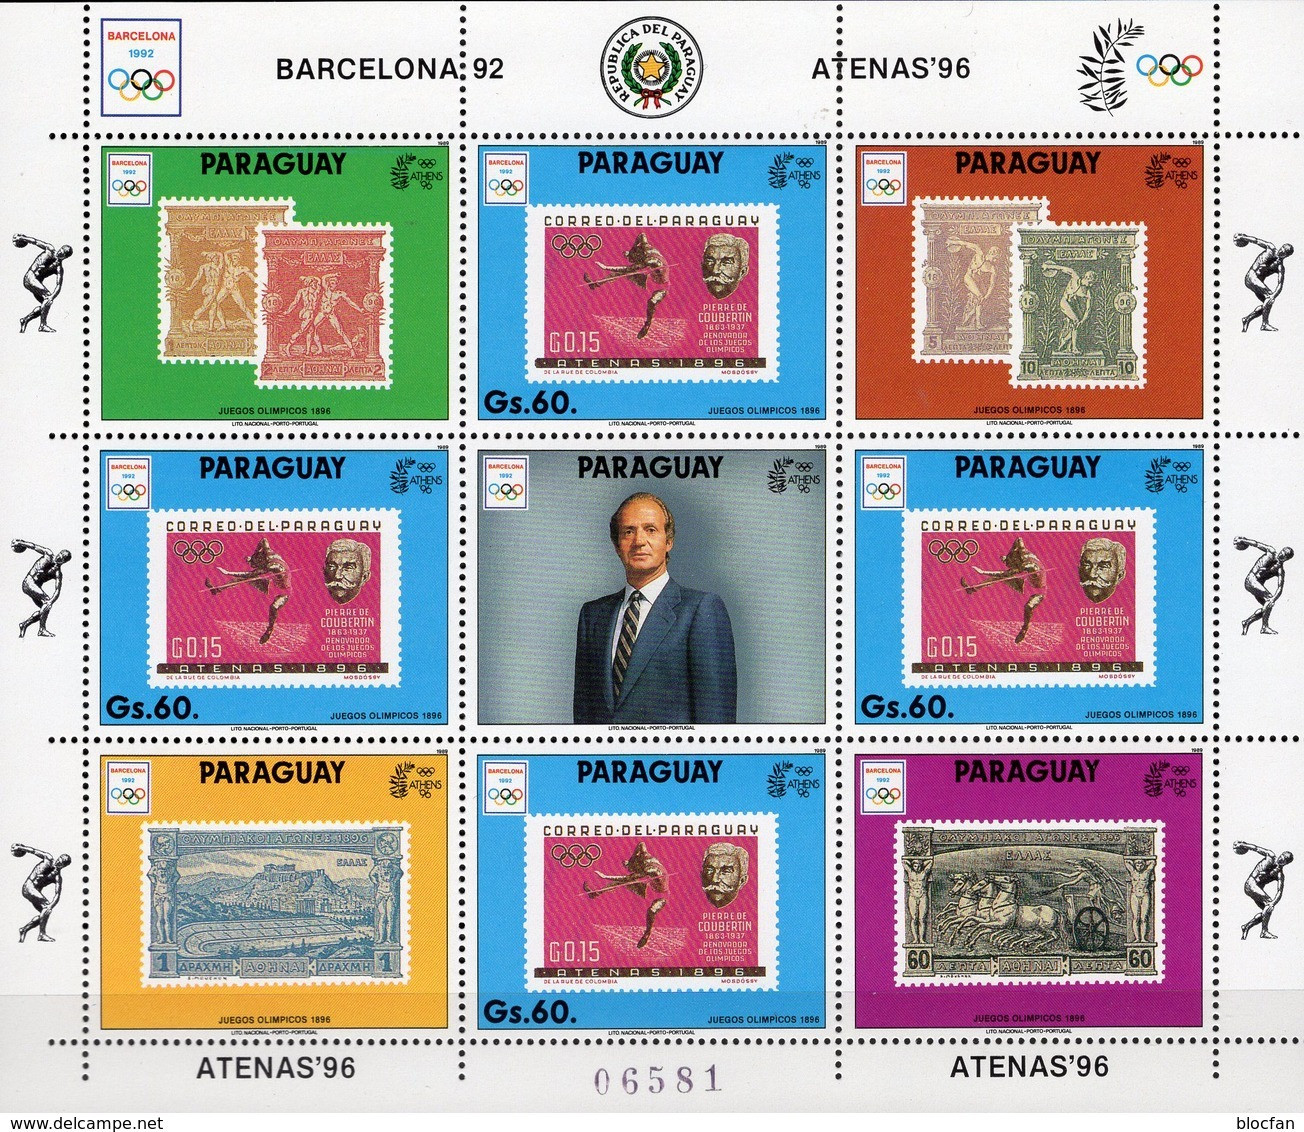 Olympia Athen 1896 Paraguay 4449 9-KB ** 36€ Barcelona 1992 Stamp On Stamps M/s Hoja Bloc Sheet Ss Sheetlet Bf Olympics - Estate 1896: Atene